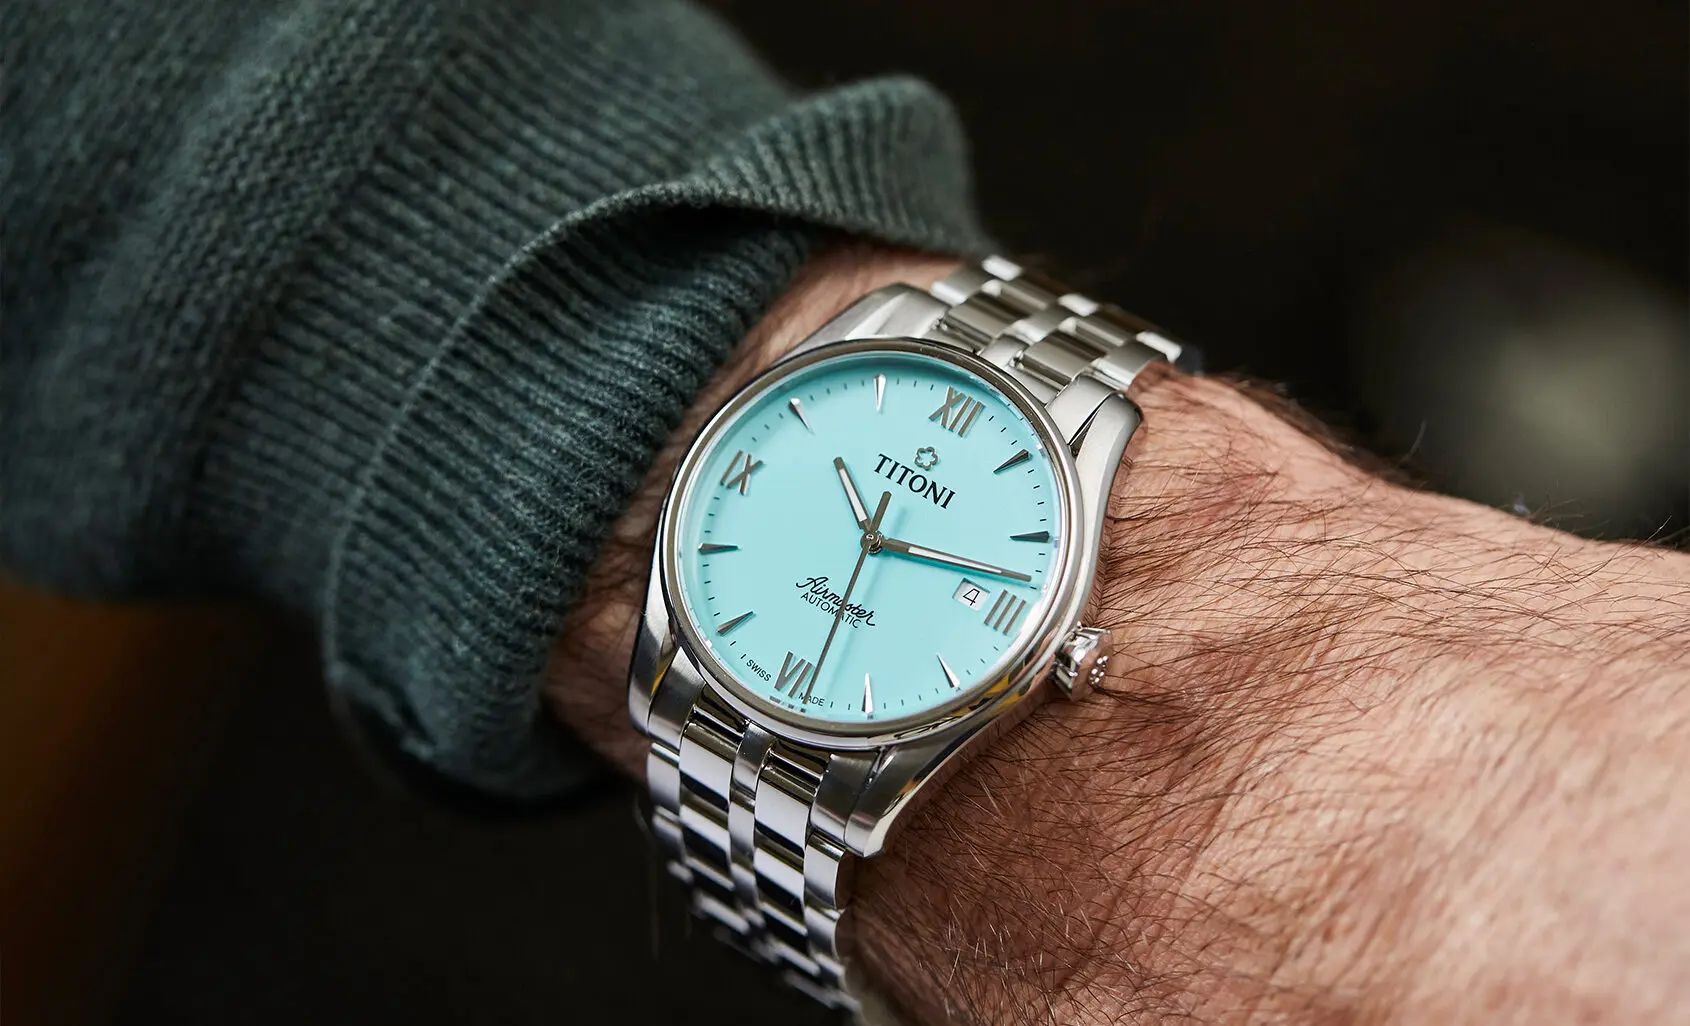 HANDS-ON: The Titoni Airmaster